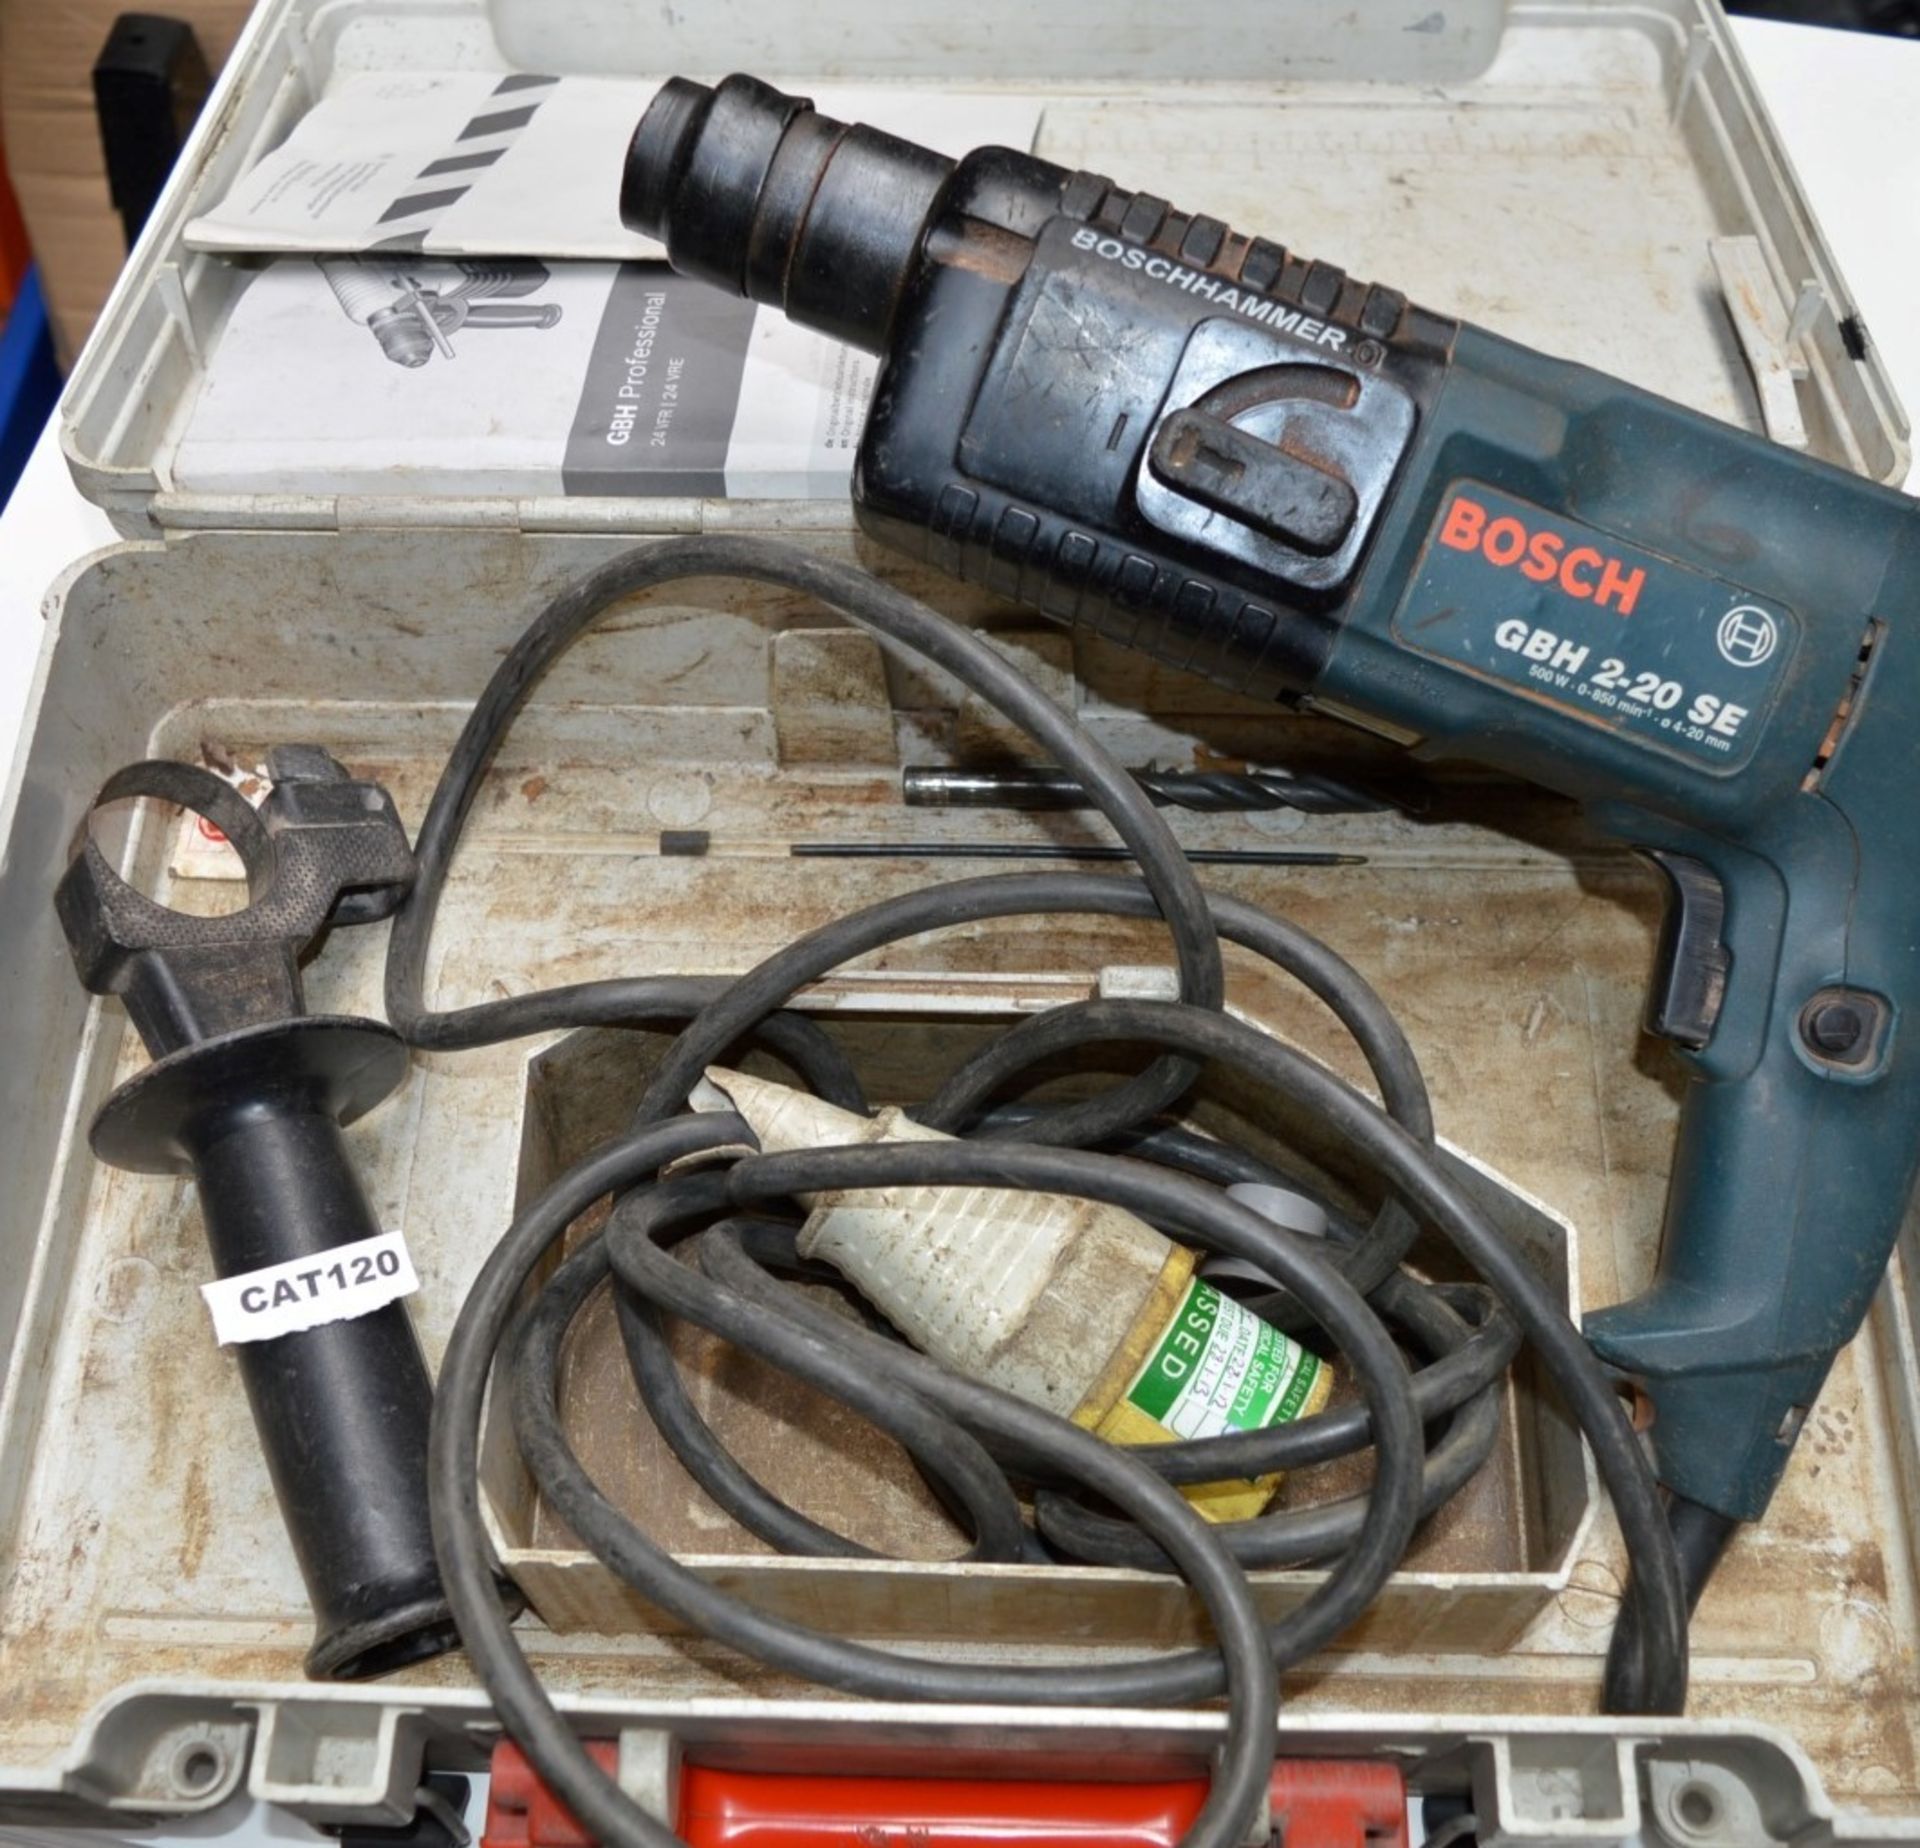 1 x Bosch Rotary Hammer Drill - 110v - Model GBH 2 SE - Includes Protective Case - Tested and - Image 5 of 5